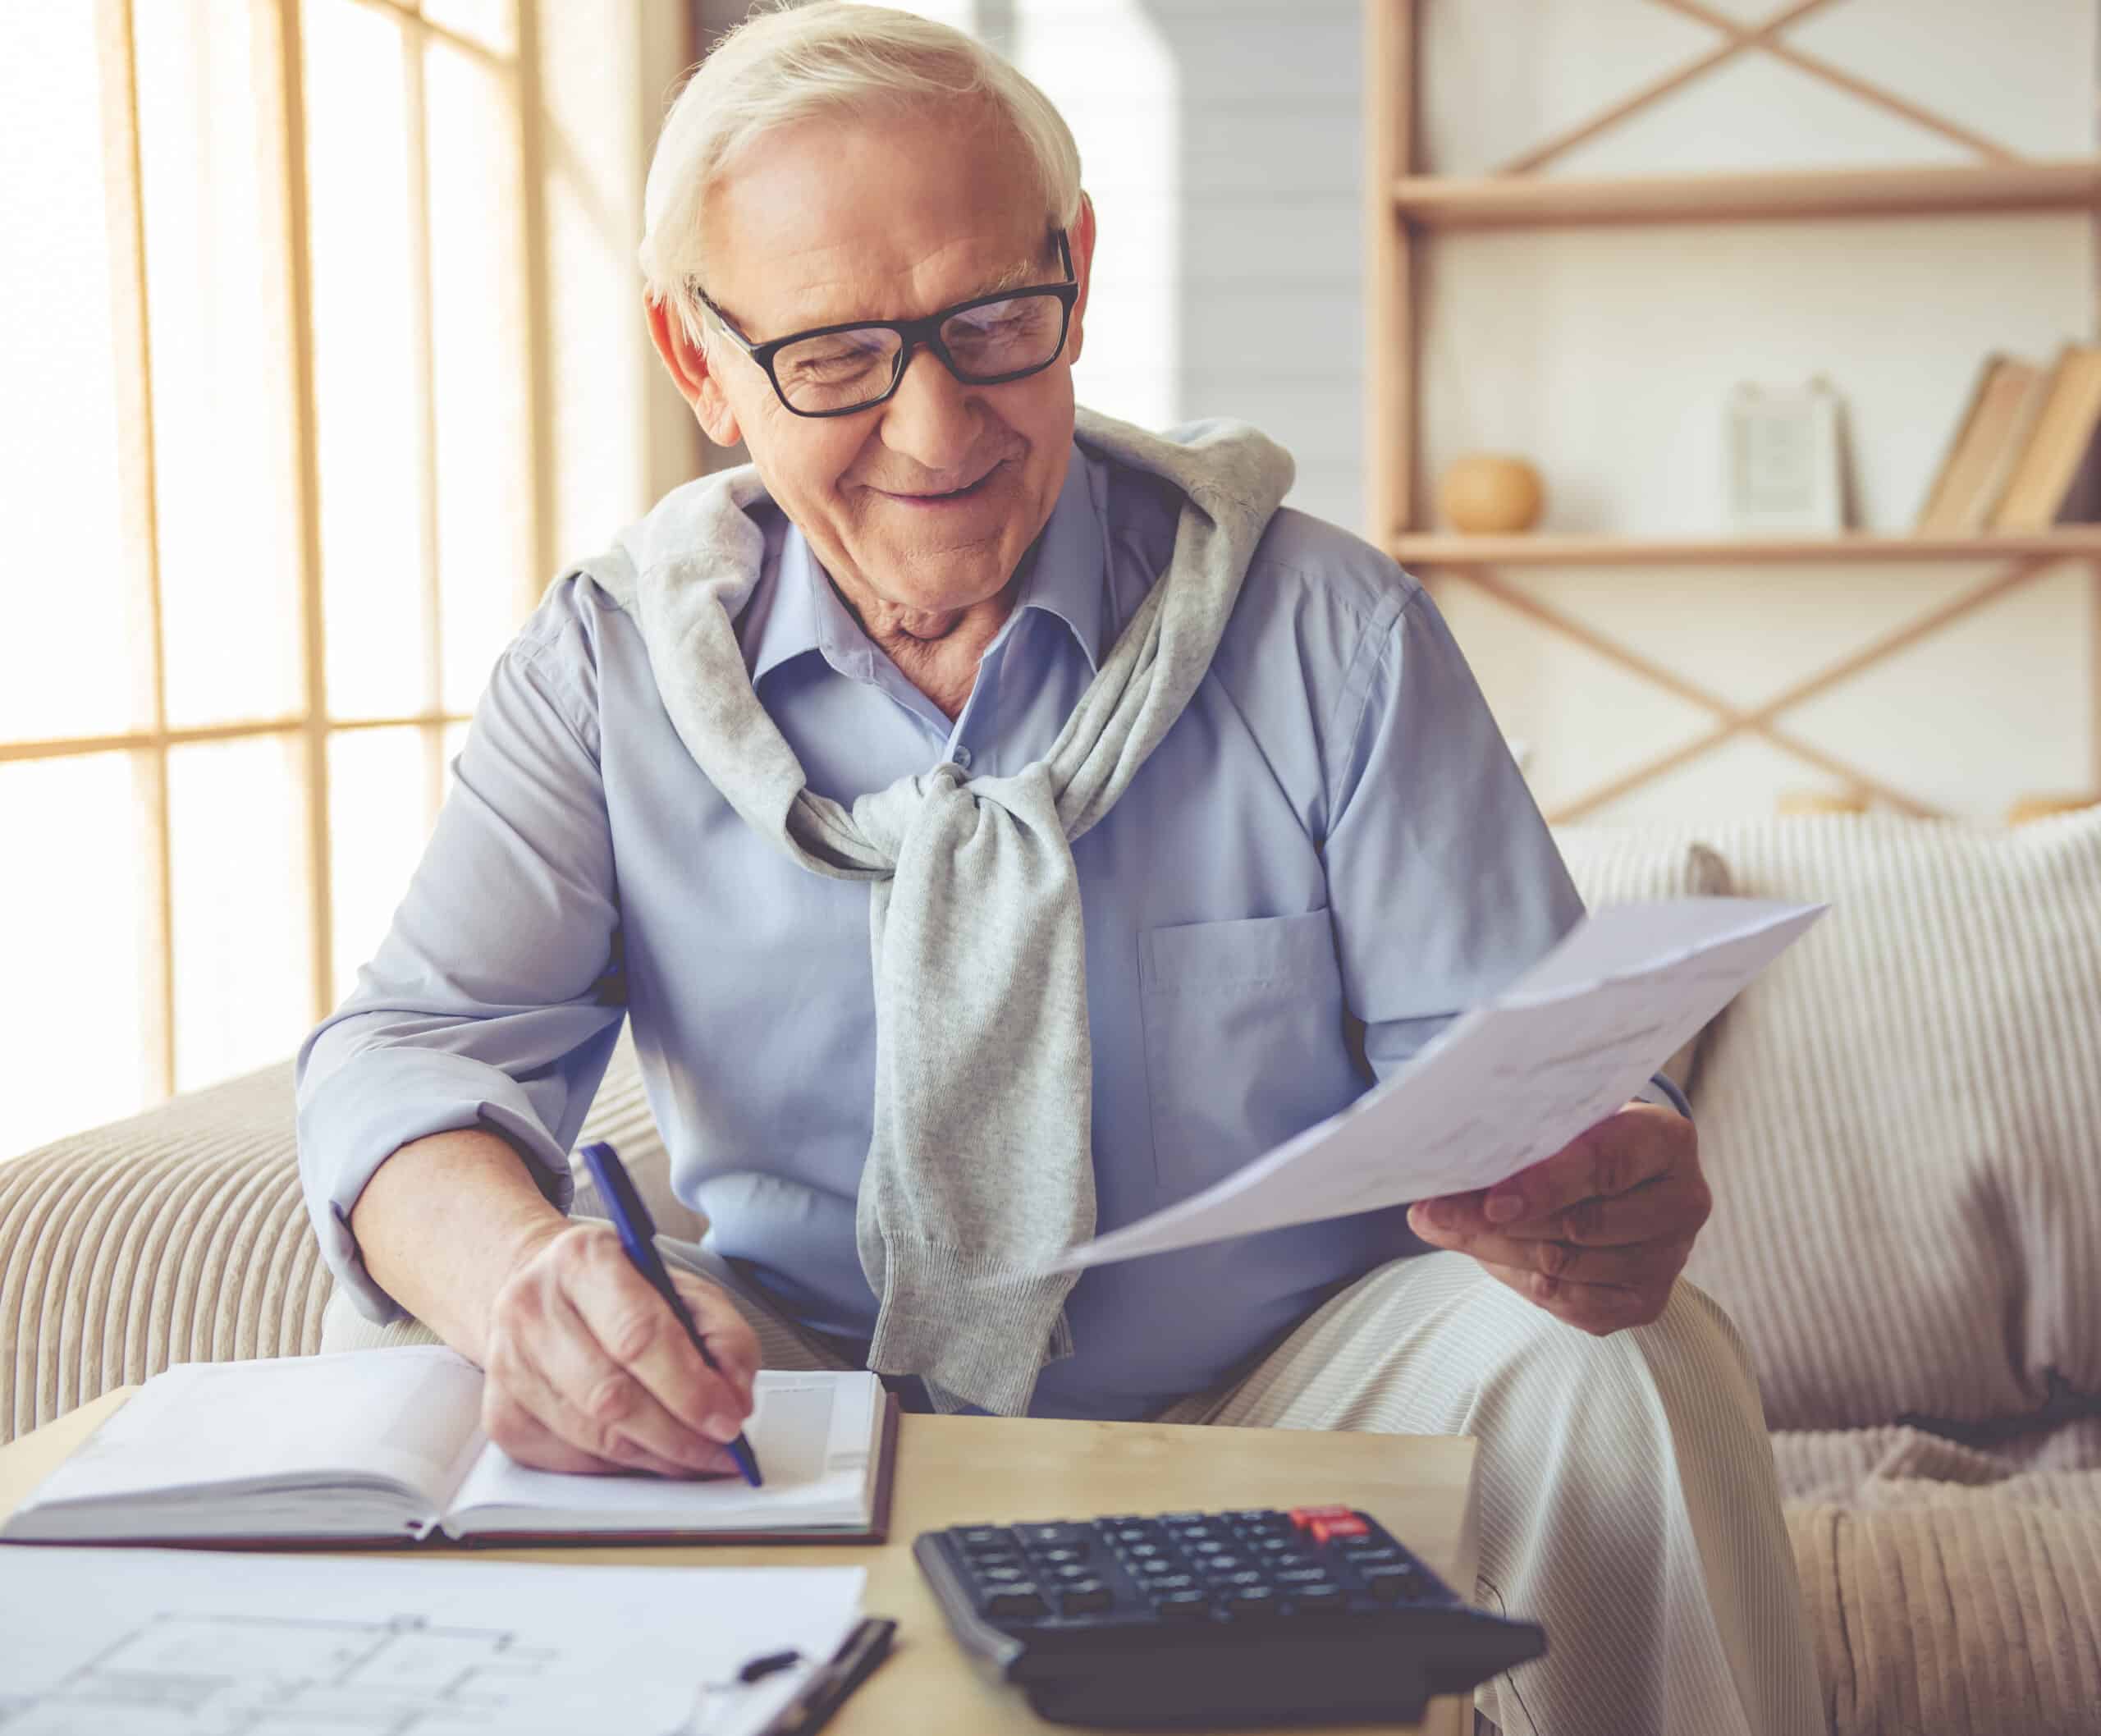 5 of the Best Jobs for Retirees